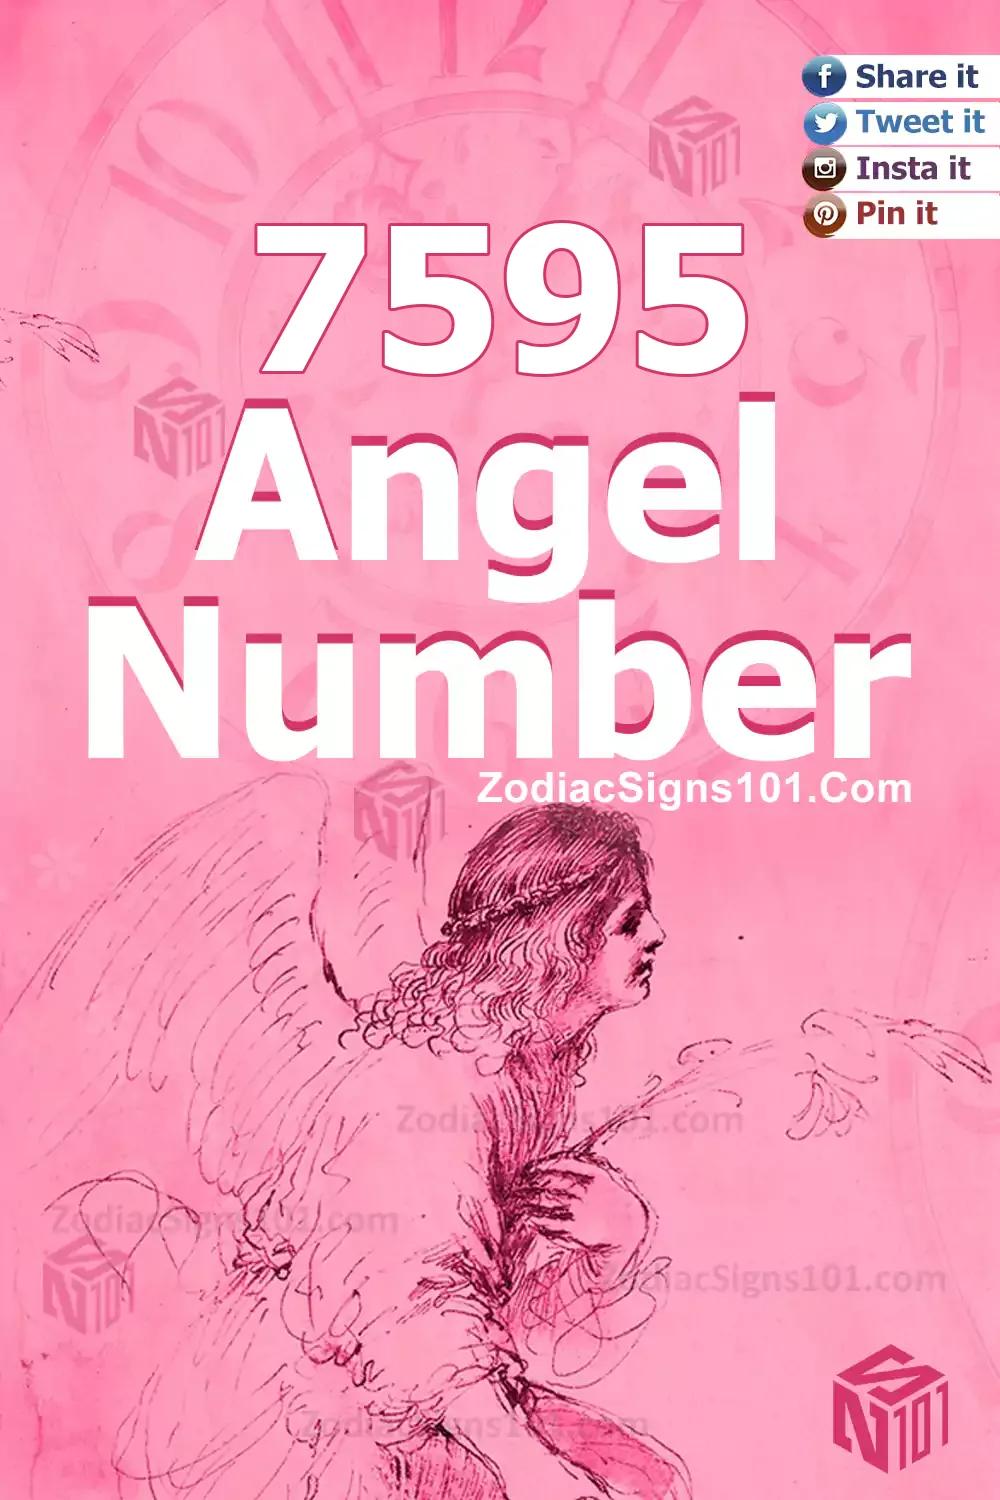 7595 Angel Number Meaning